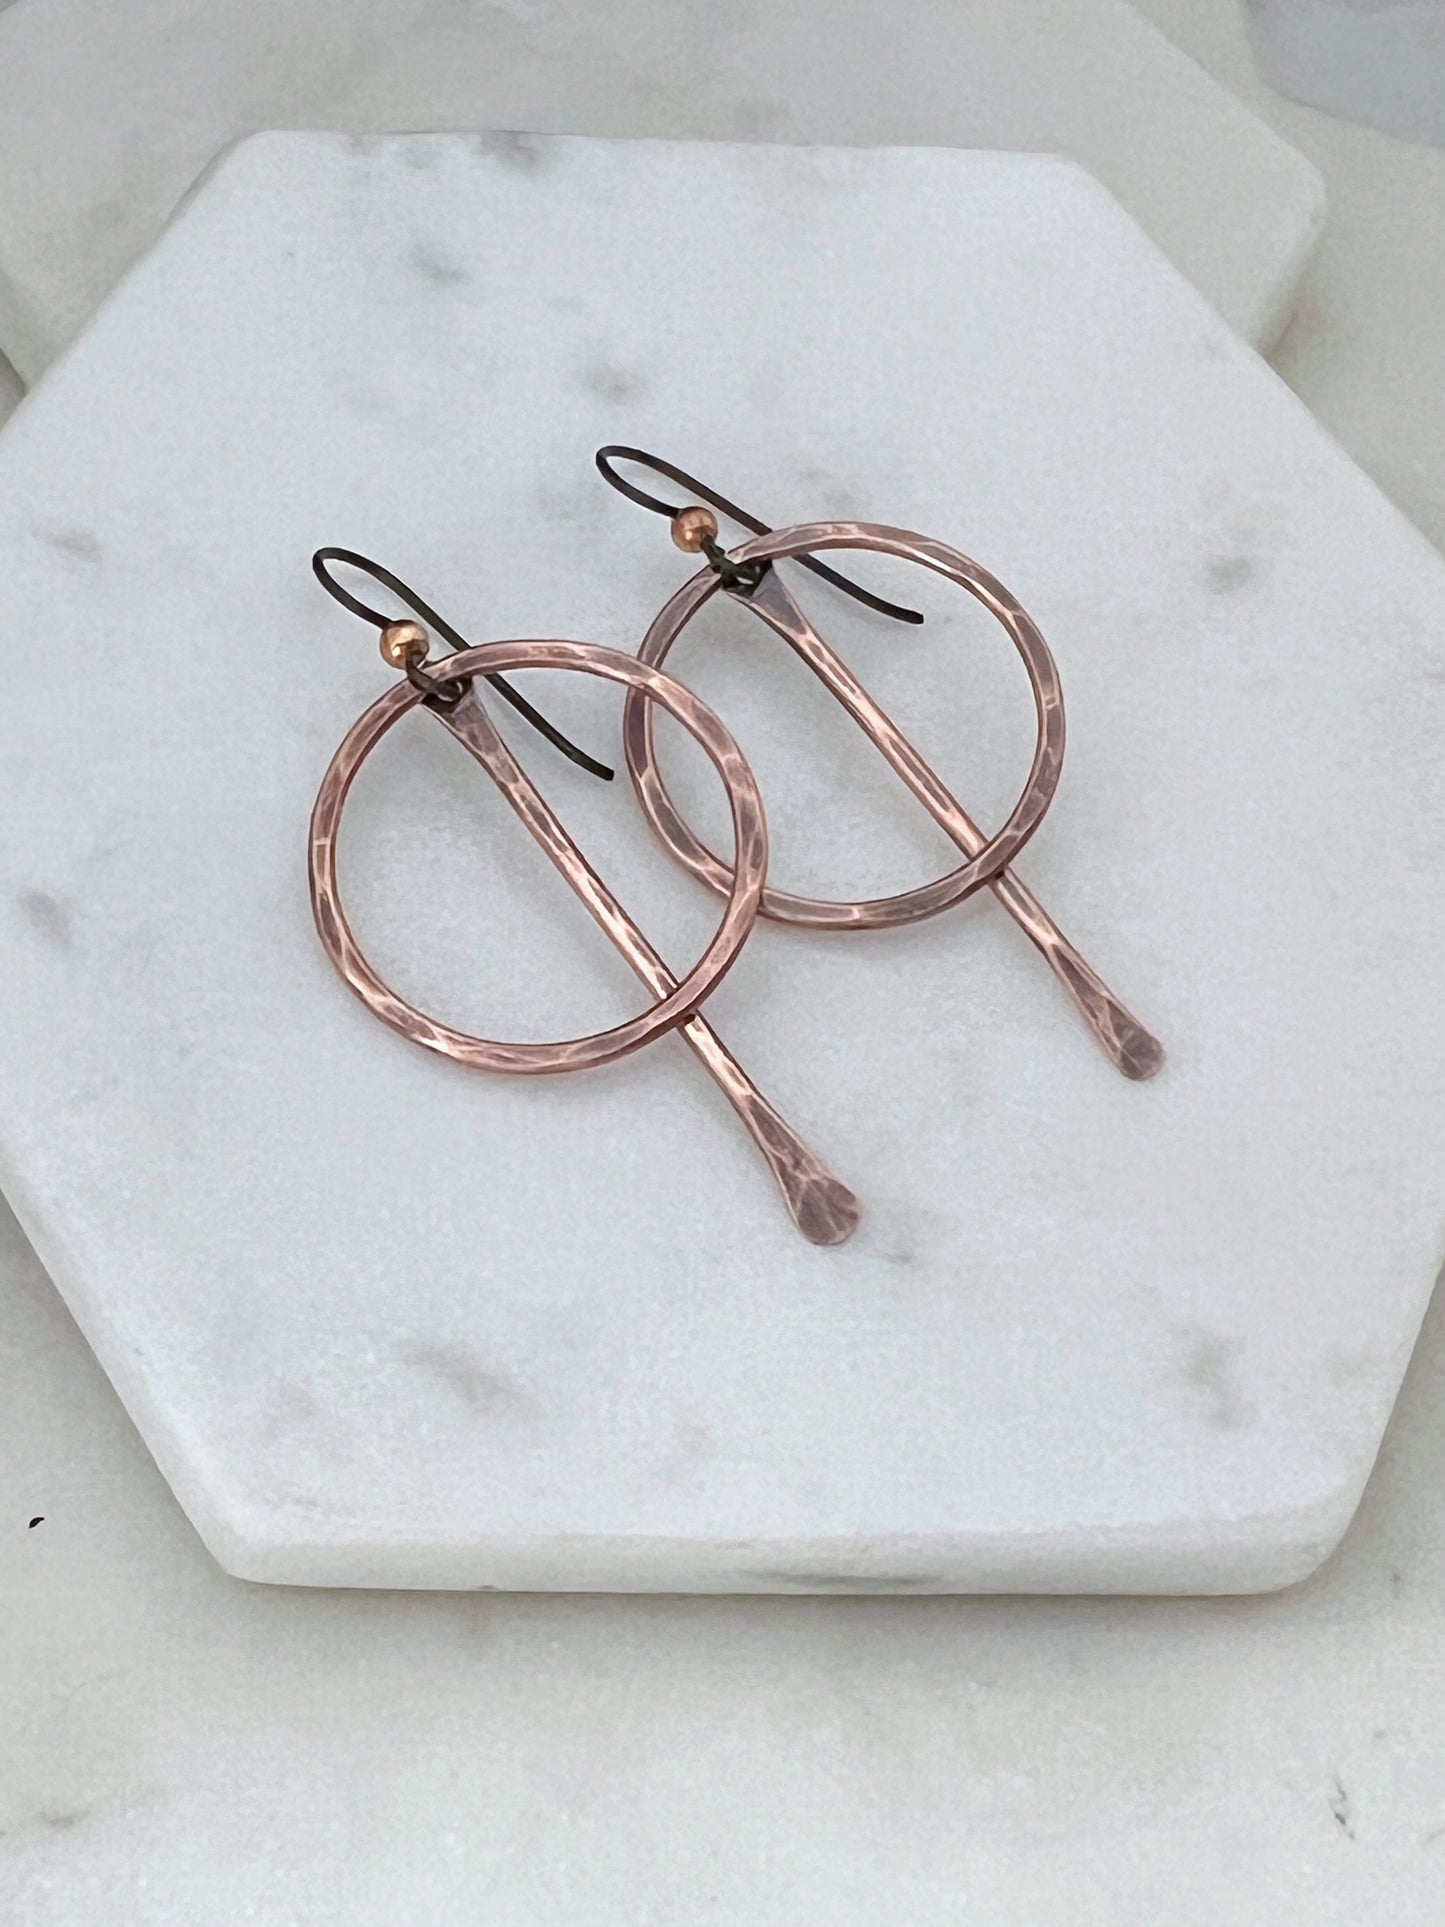 Forged Copper hoop earrings with paddle center